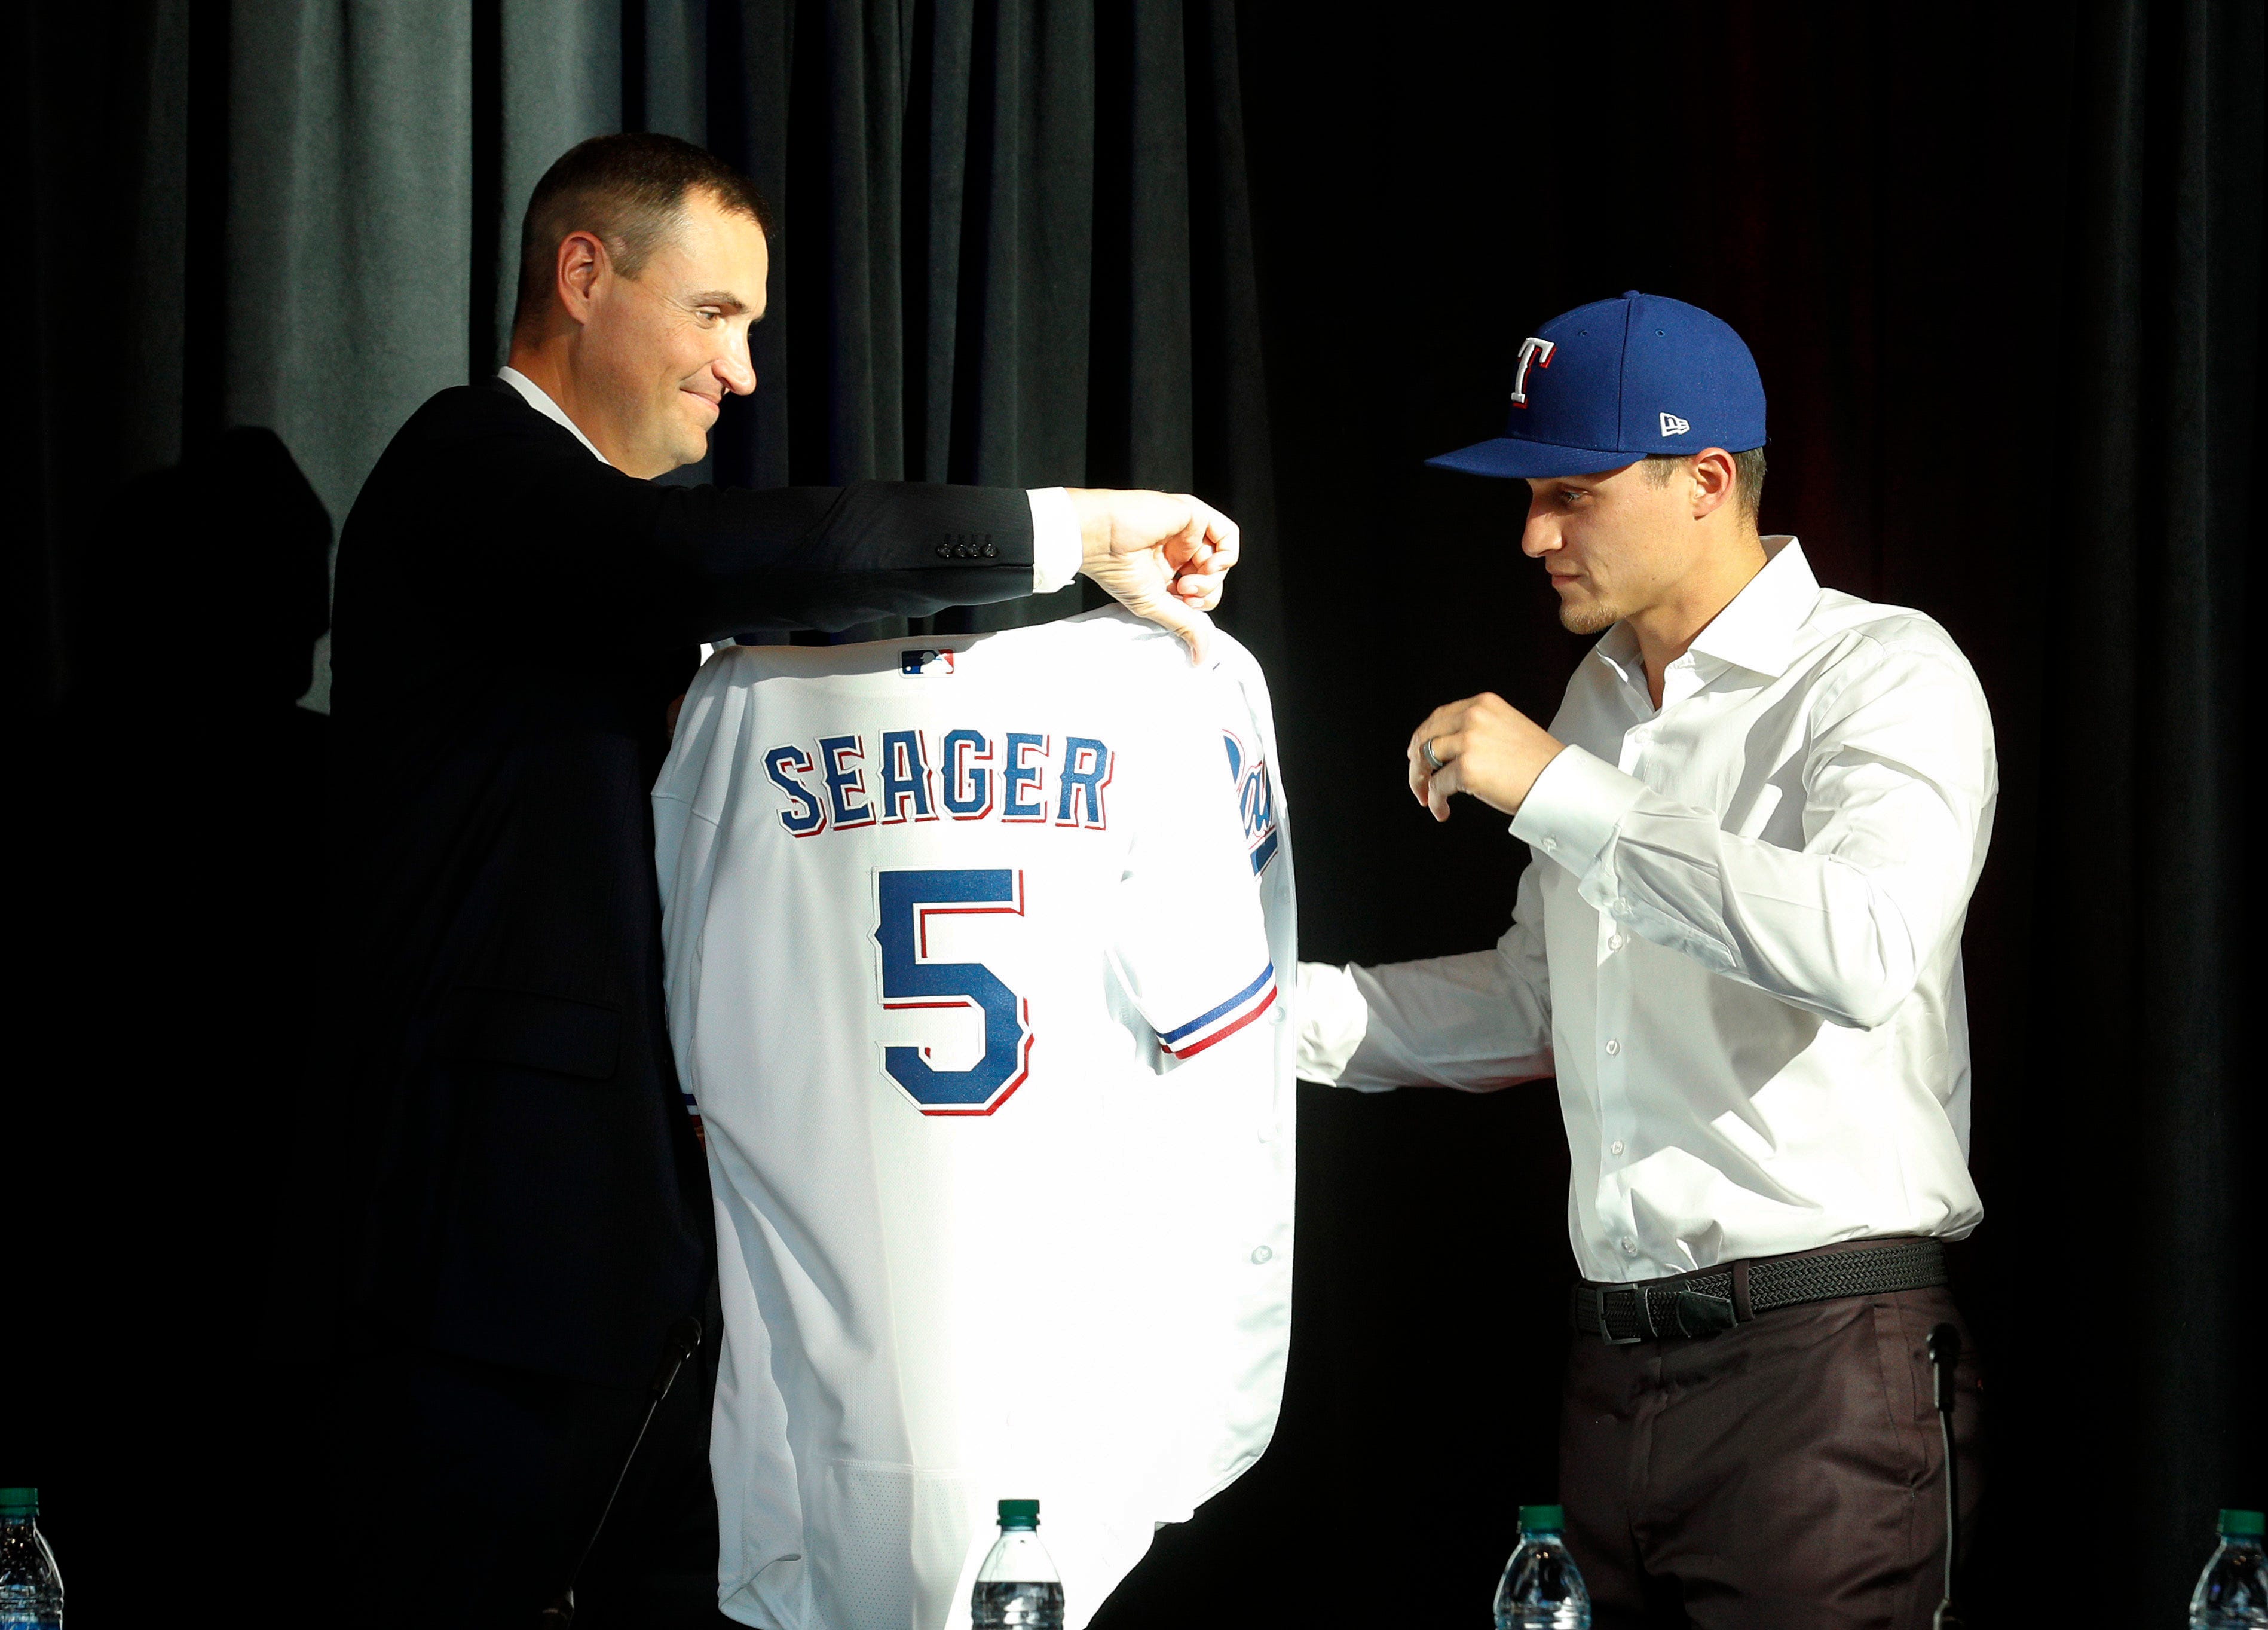 Thursday Newsletter time: Corey Seager has done something in Arlington that Texas  Rangers haven't.